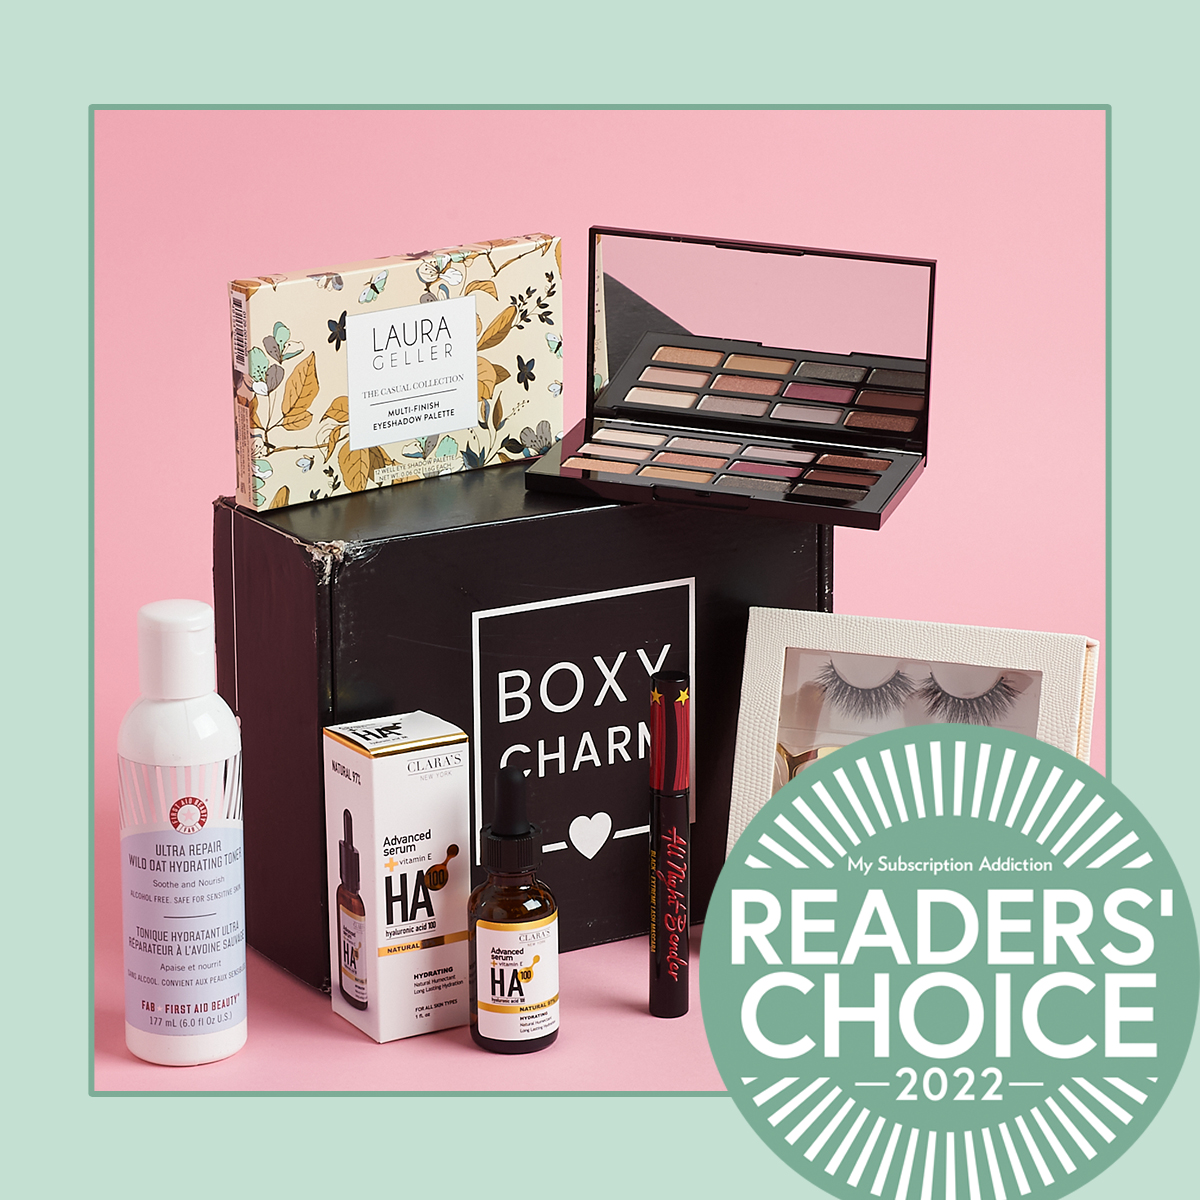 The 16 Best Makeup Subscription Boxes in 2022 – Readers’ Choice Awards